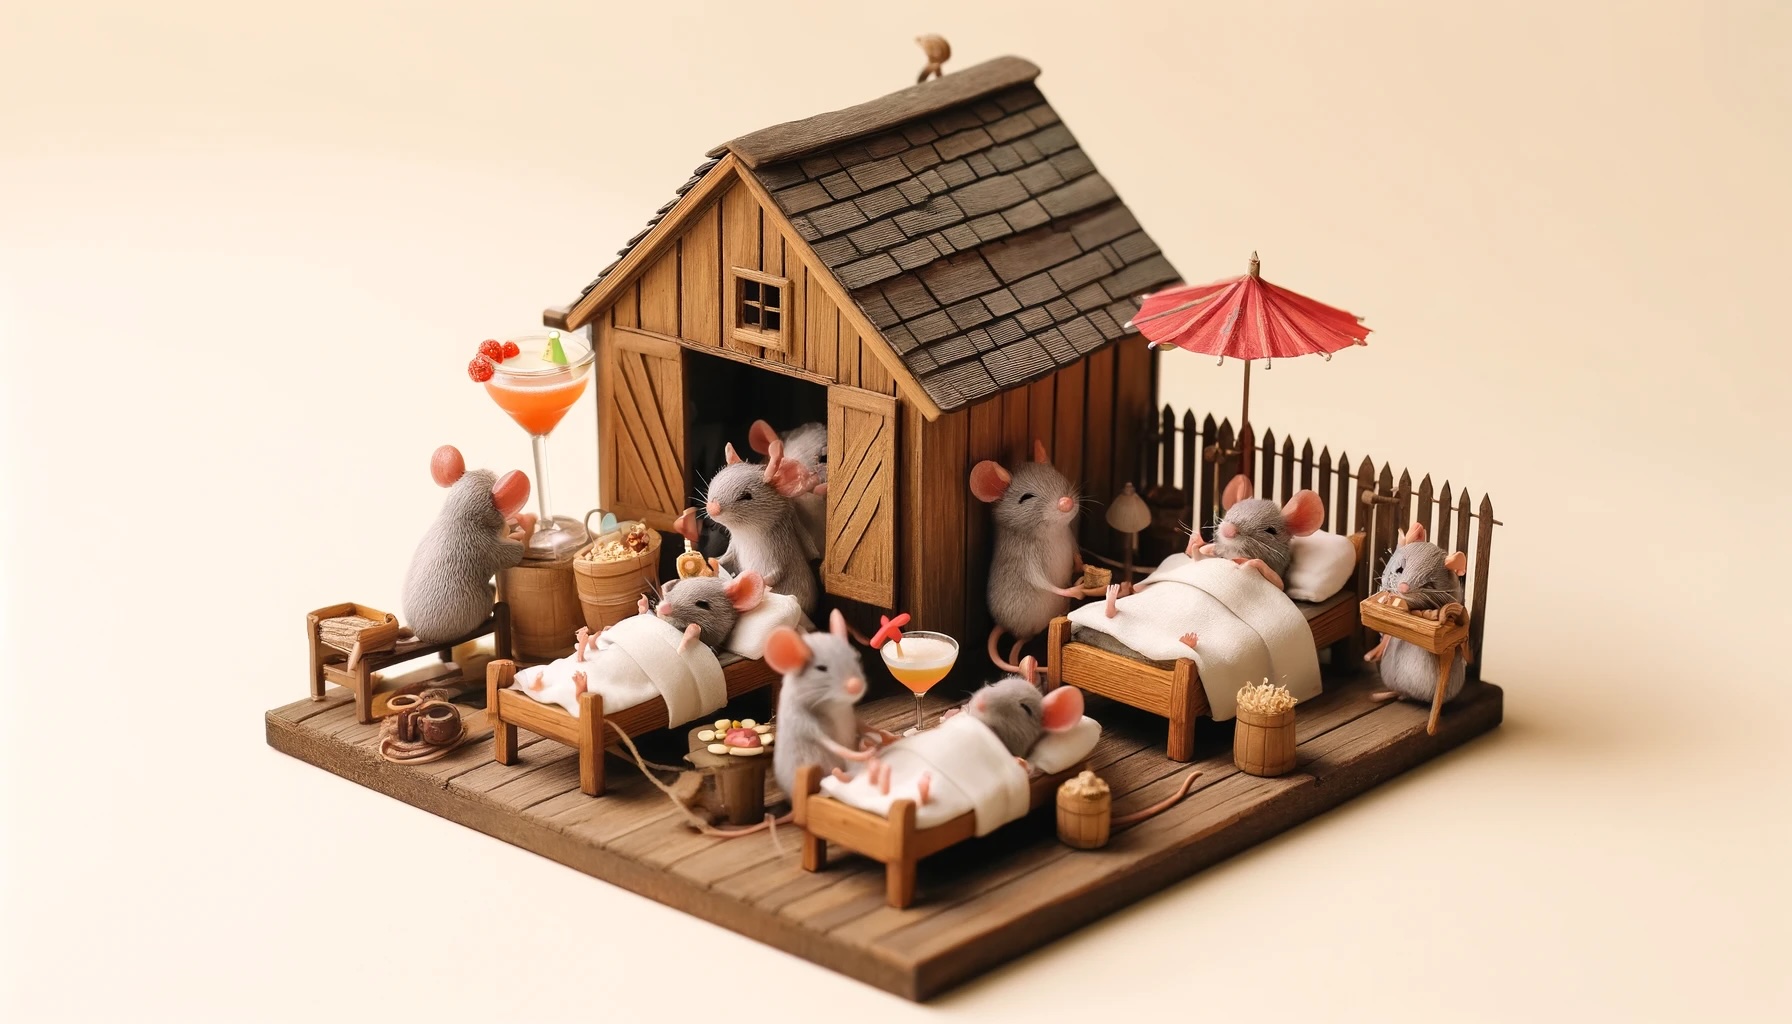 Whimsical illustration of a miniature barn filled with mice resting peacefully on tiny beds. Some mice are sipping margaritas with mini umbrellas, while others are receiving little mouse massages from fellow mice, creating a cozy, spa-like atmosphere with terpenes in cannabis medicine